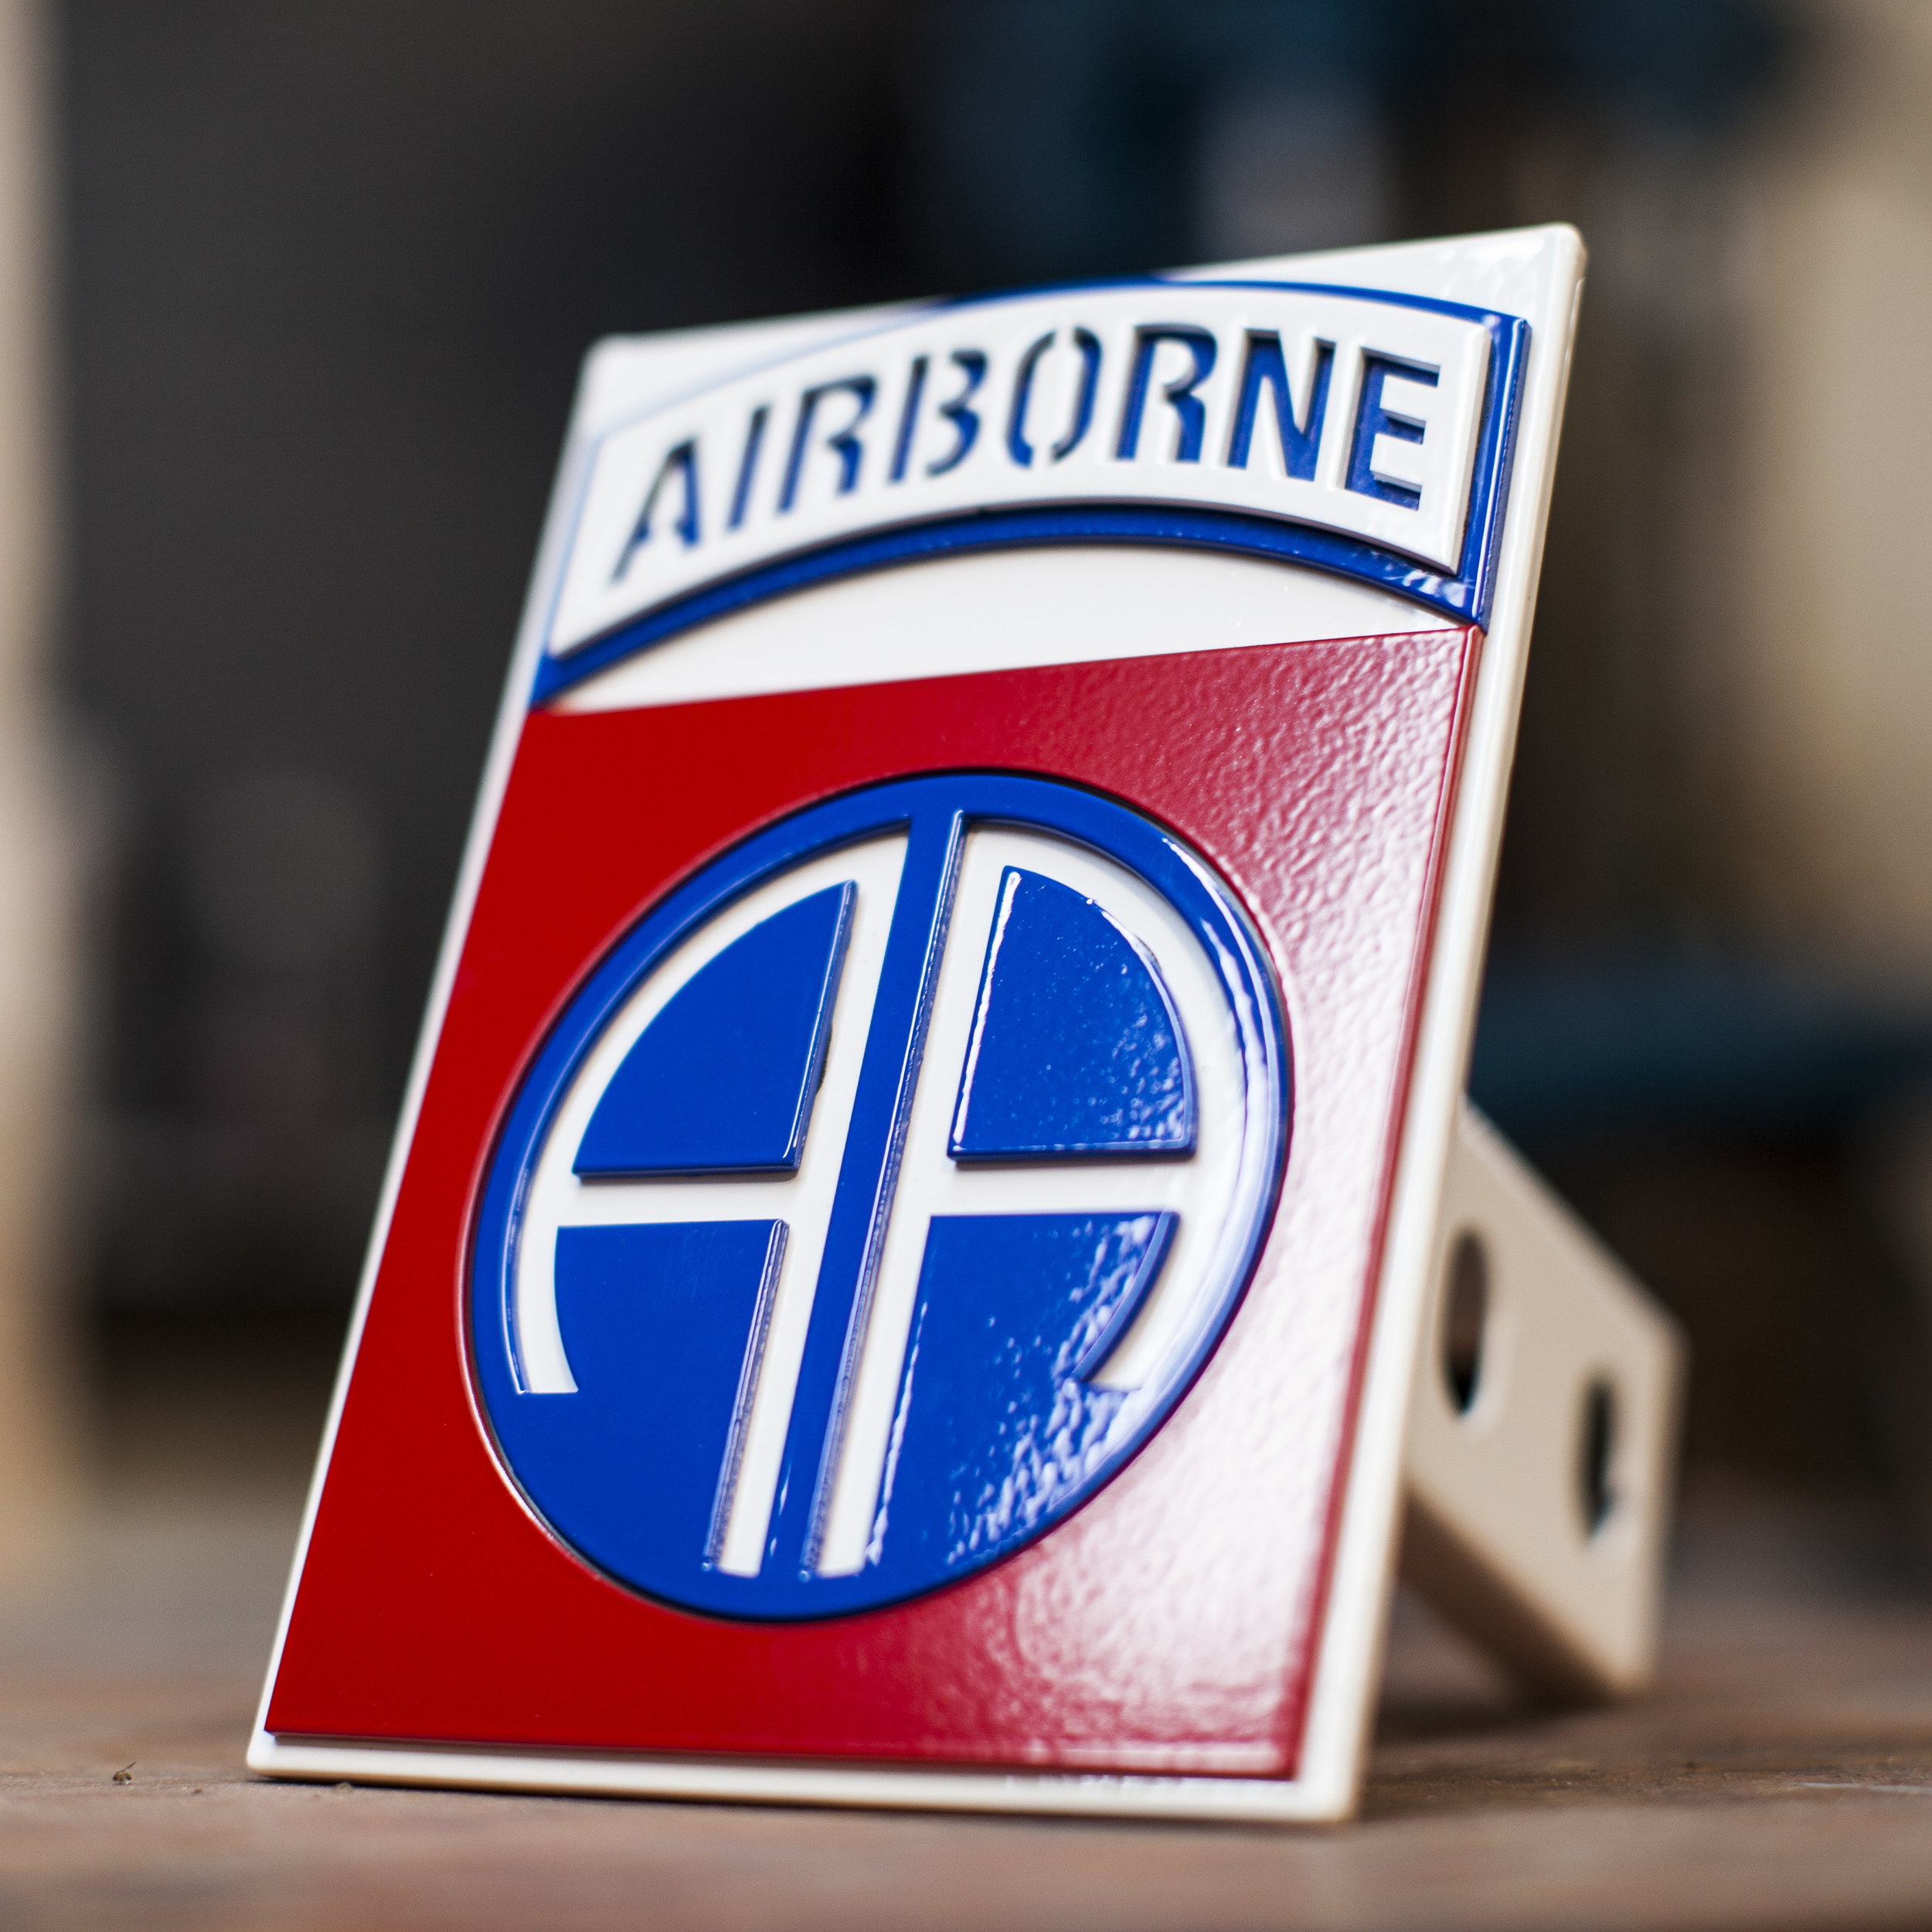 82nd Airborne - Trailer Hitch Cover — Kempter Kustoms 82nd Airborne Trailer Hitch Cover